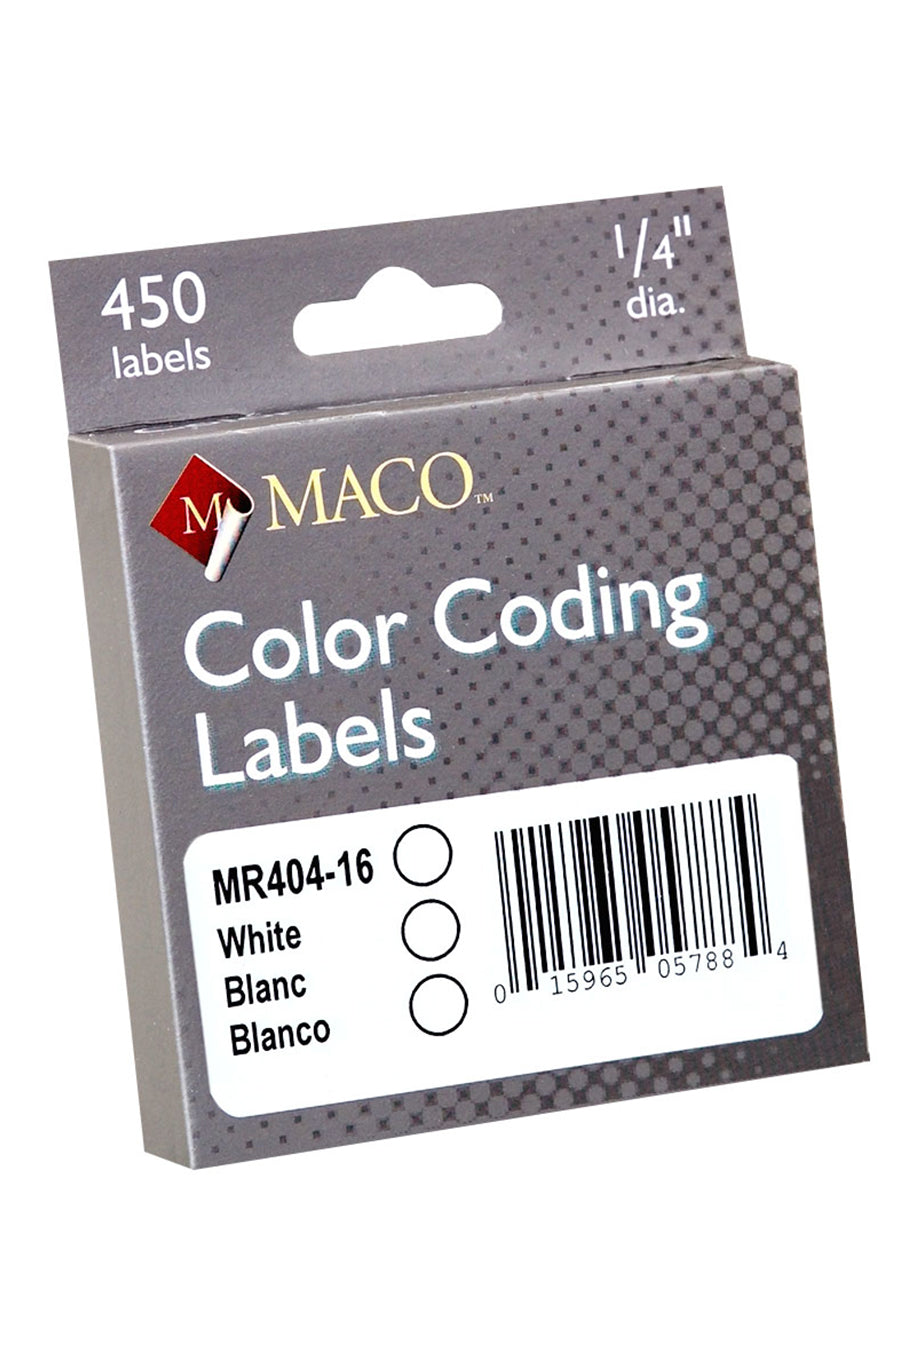 1/4" Dia. Color Coding Labels, White, 450/On Roll in Dispenser Box